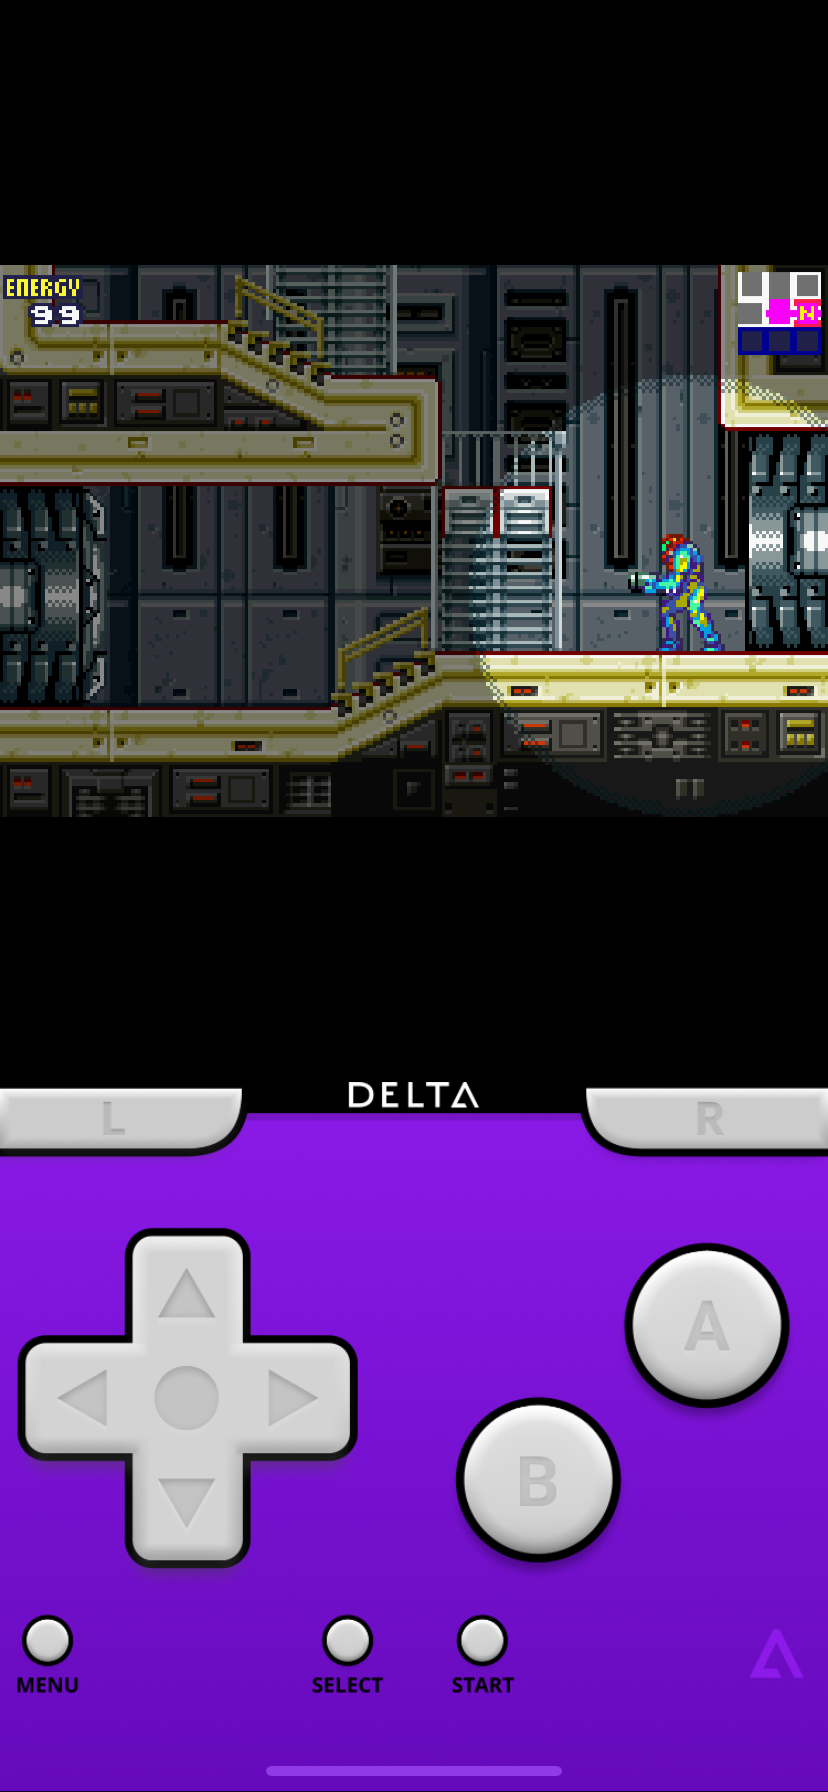 Playing Metroid Fusion GBA game with Delta emulator on iOS.